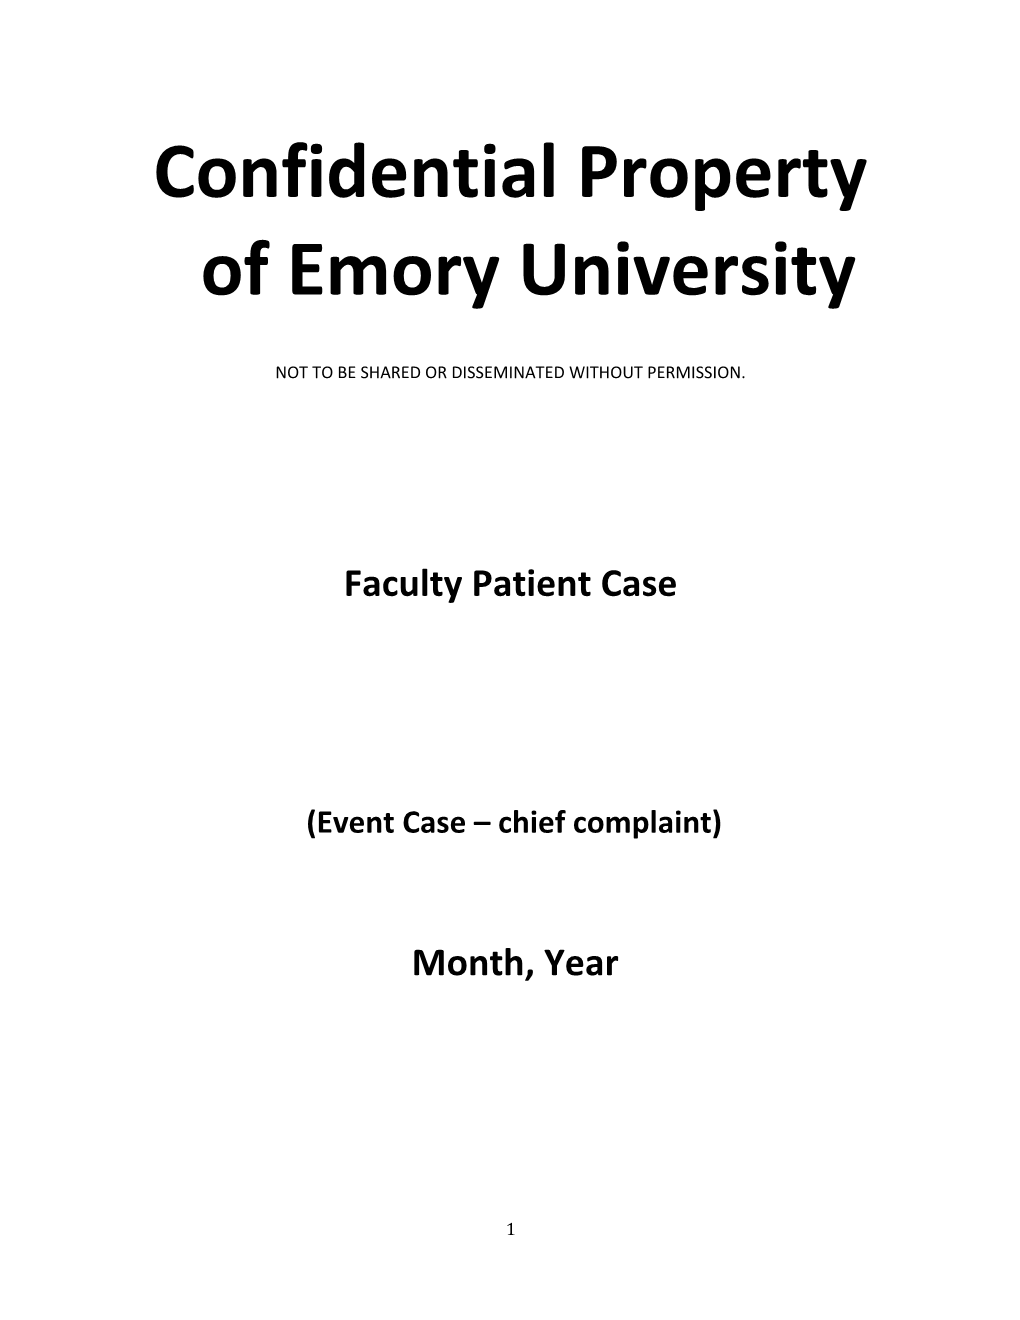 Confidential Property of Emory University